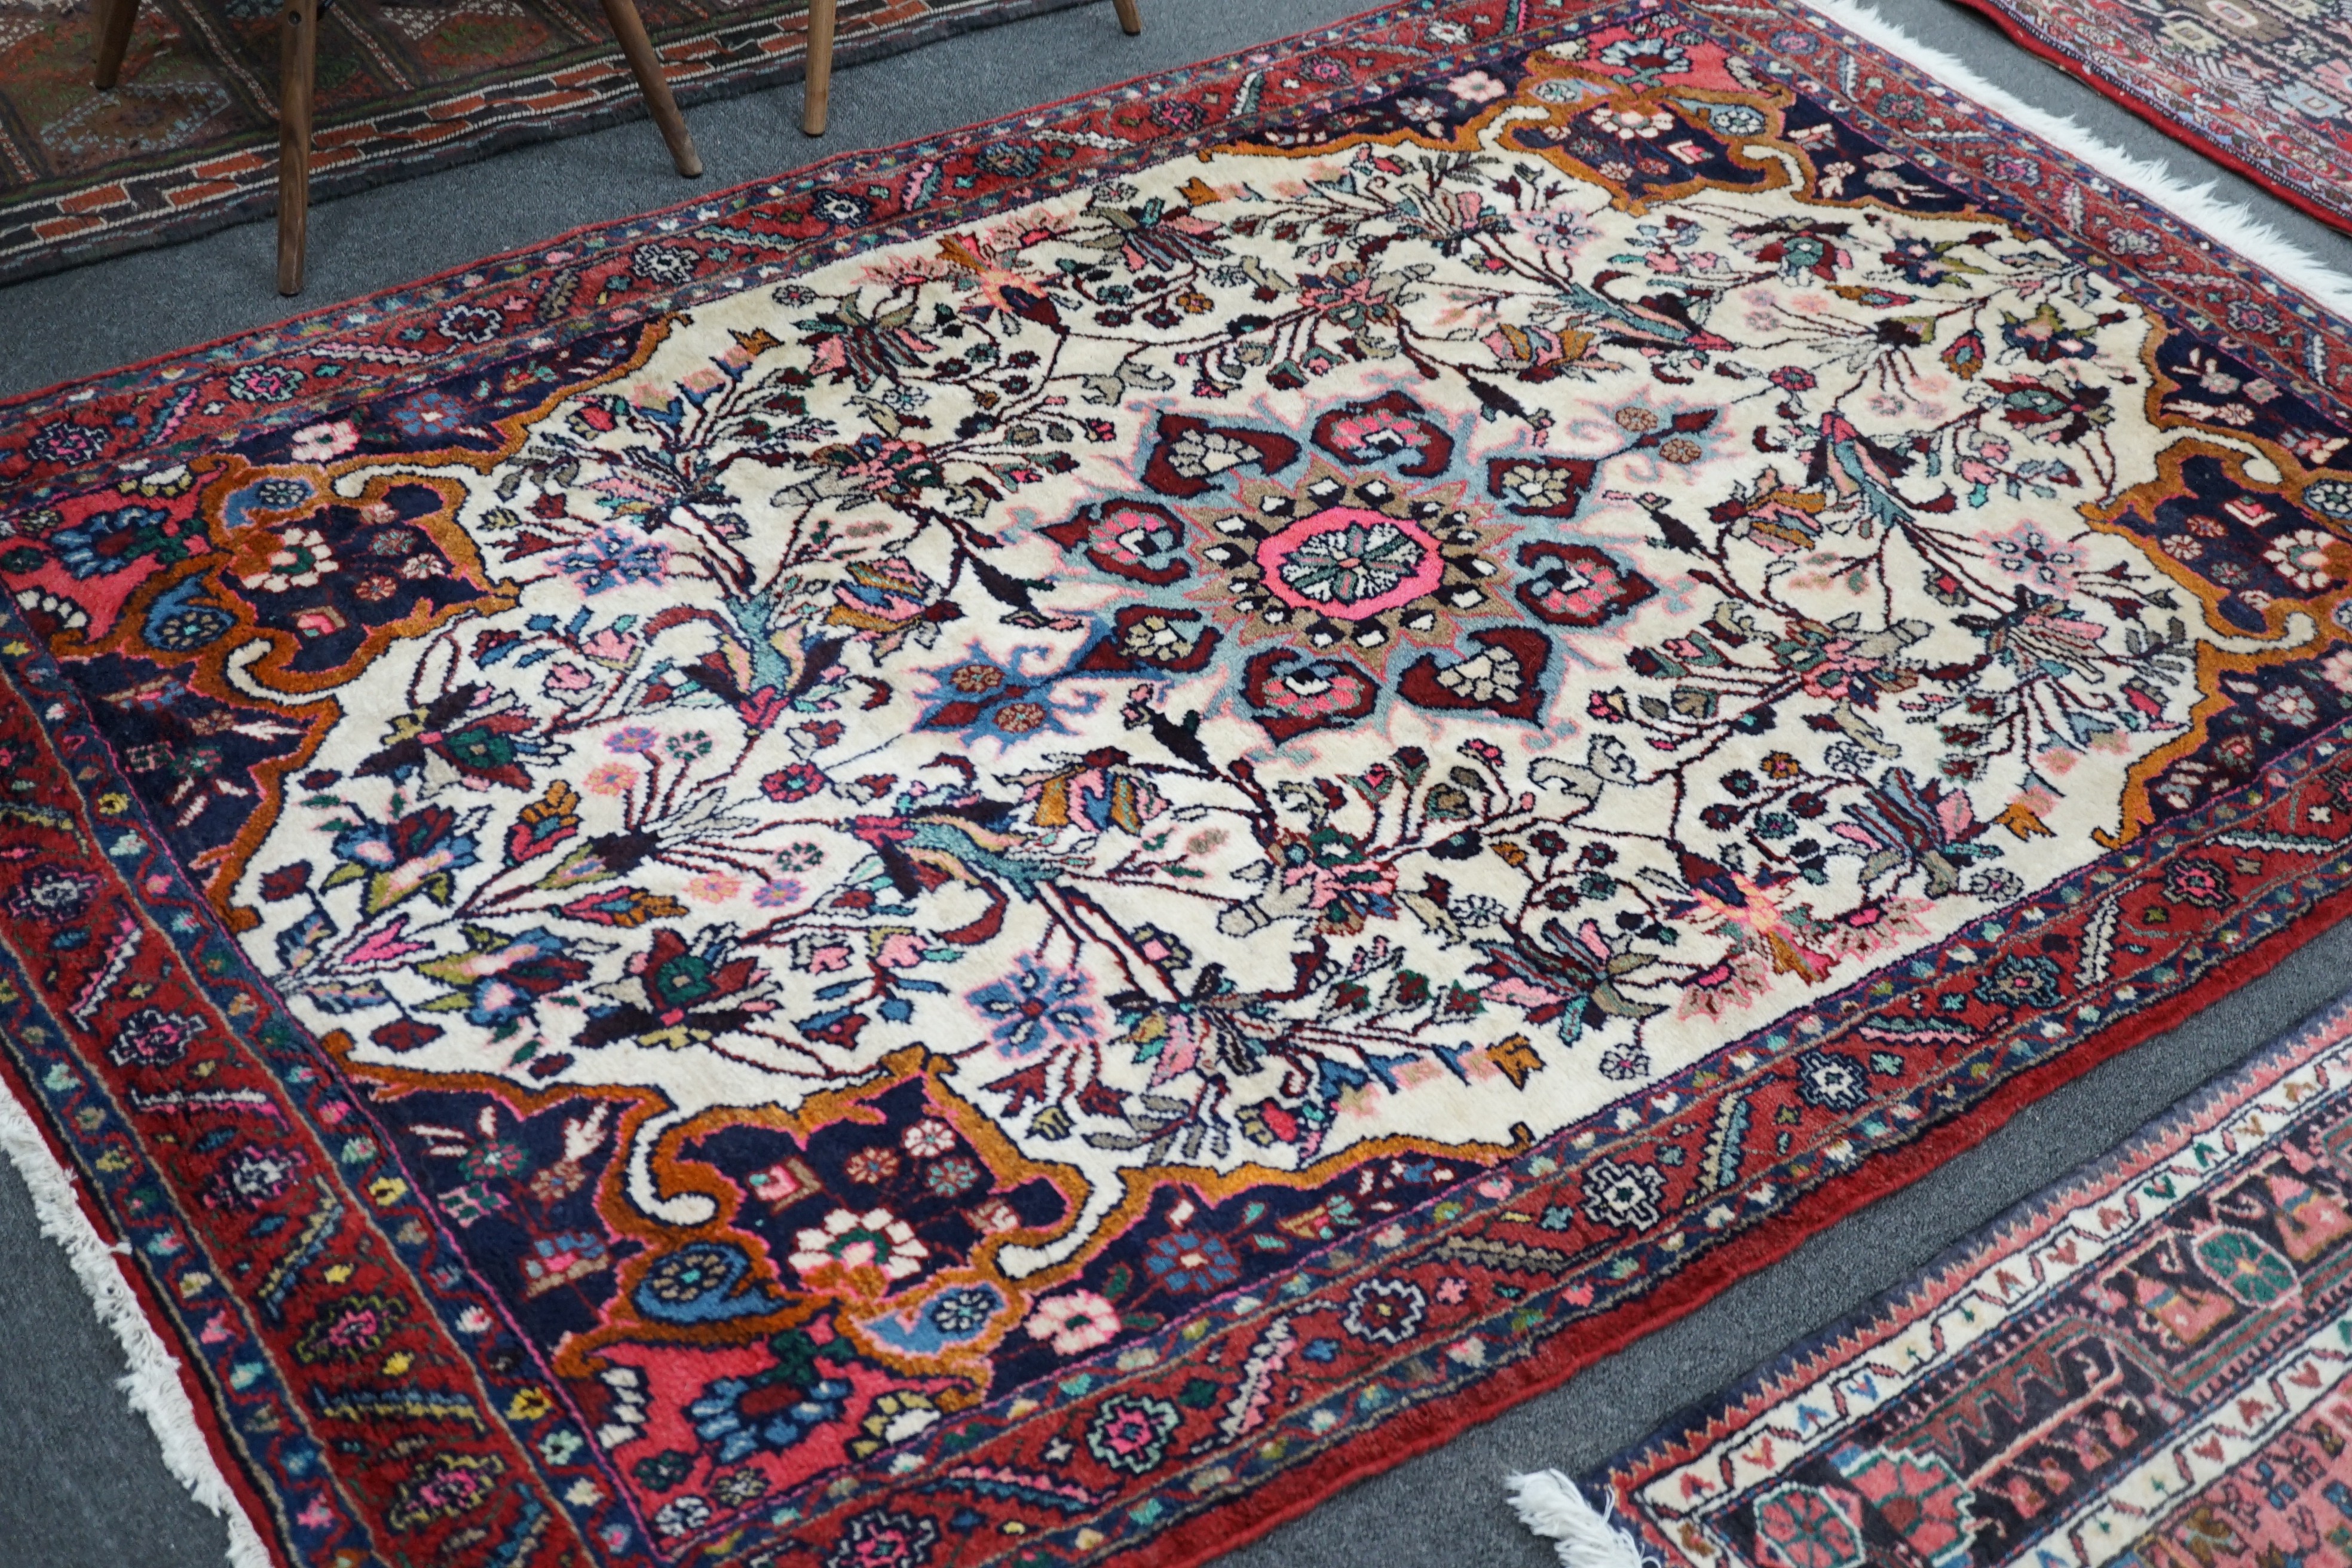 A North West Persian ivory ground rug, 220 x 140cm, and a smaller blue ground rug